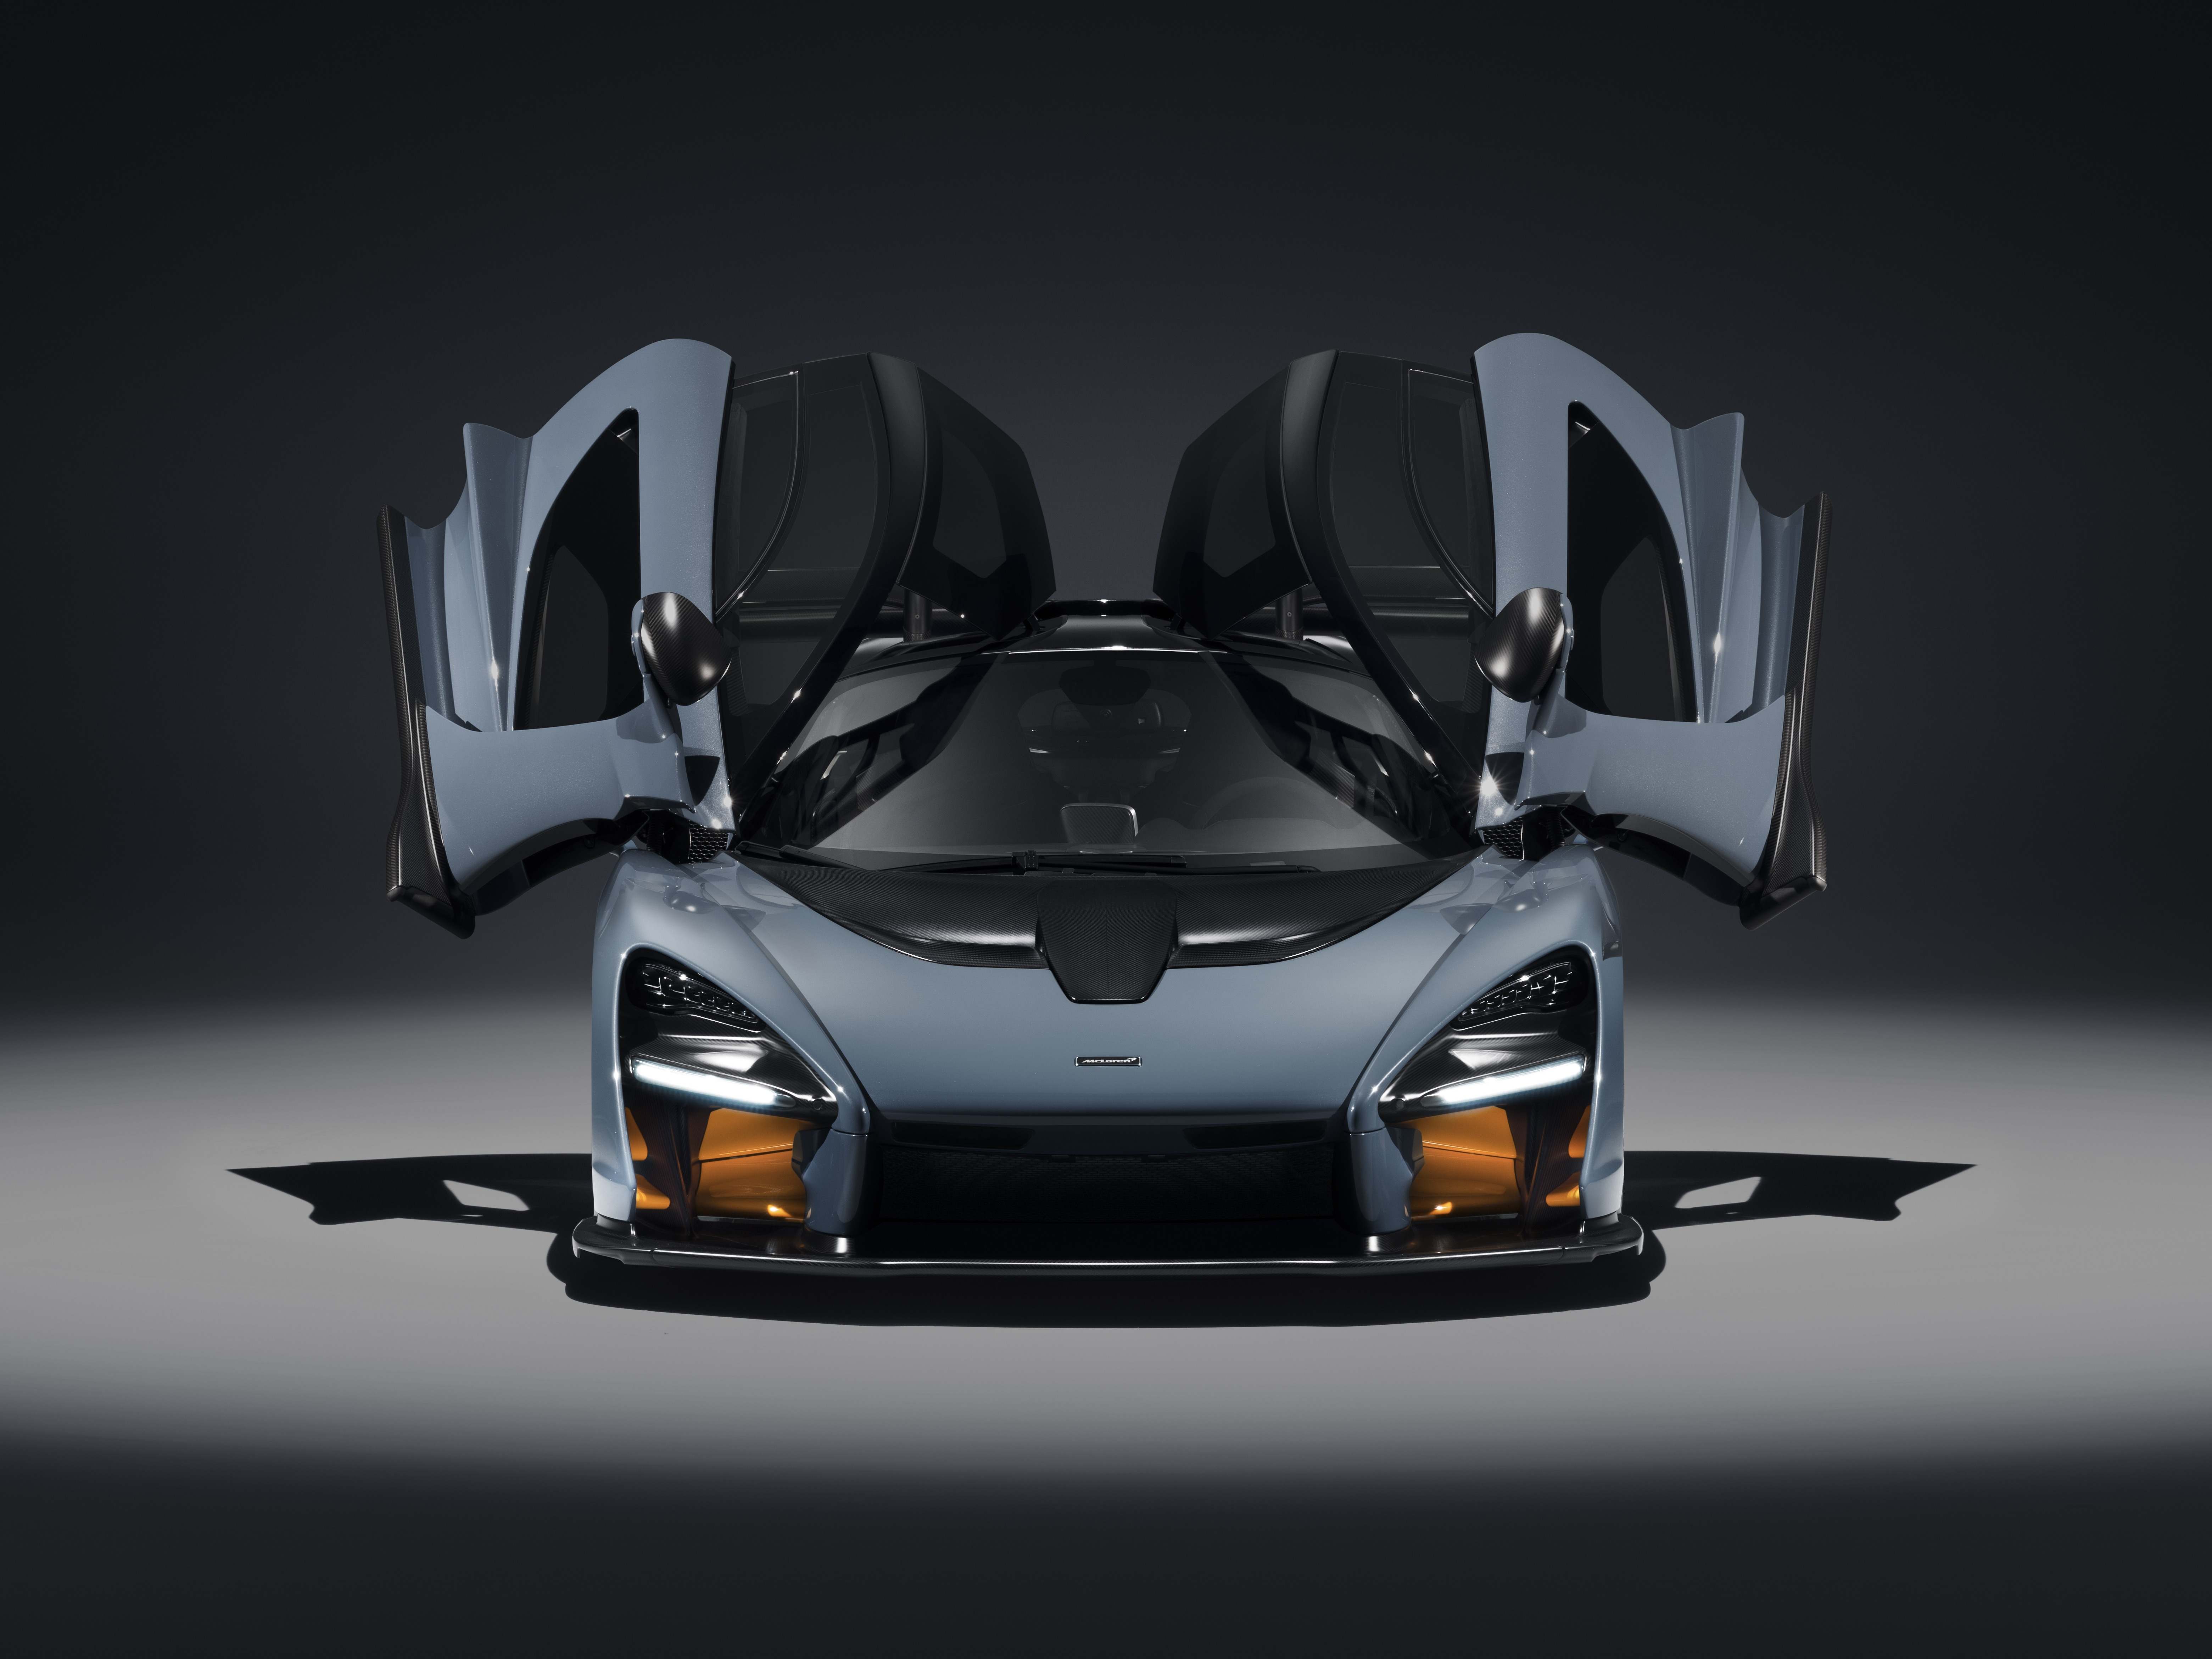 New facts, figures and a shade of grey revealed for McLaren Senna